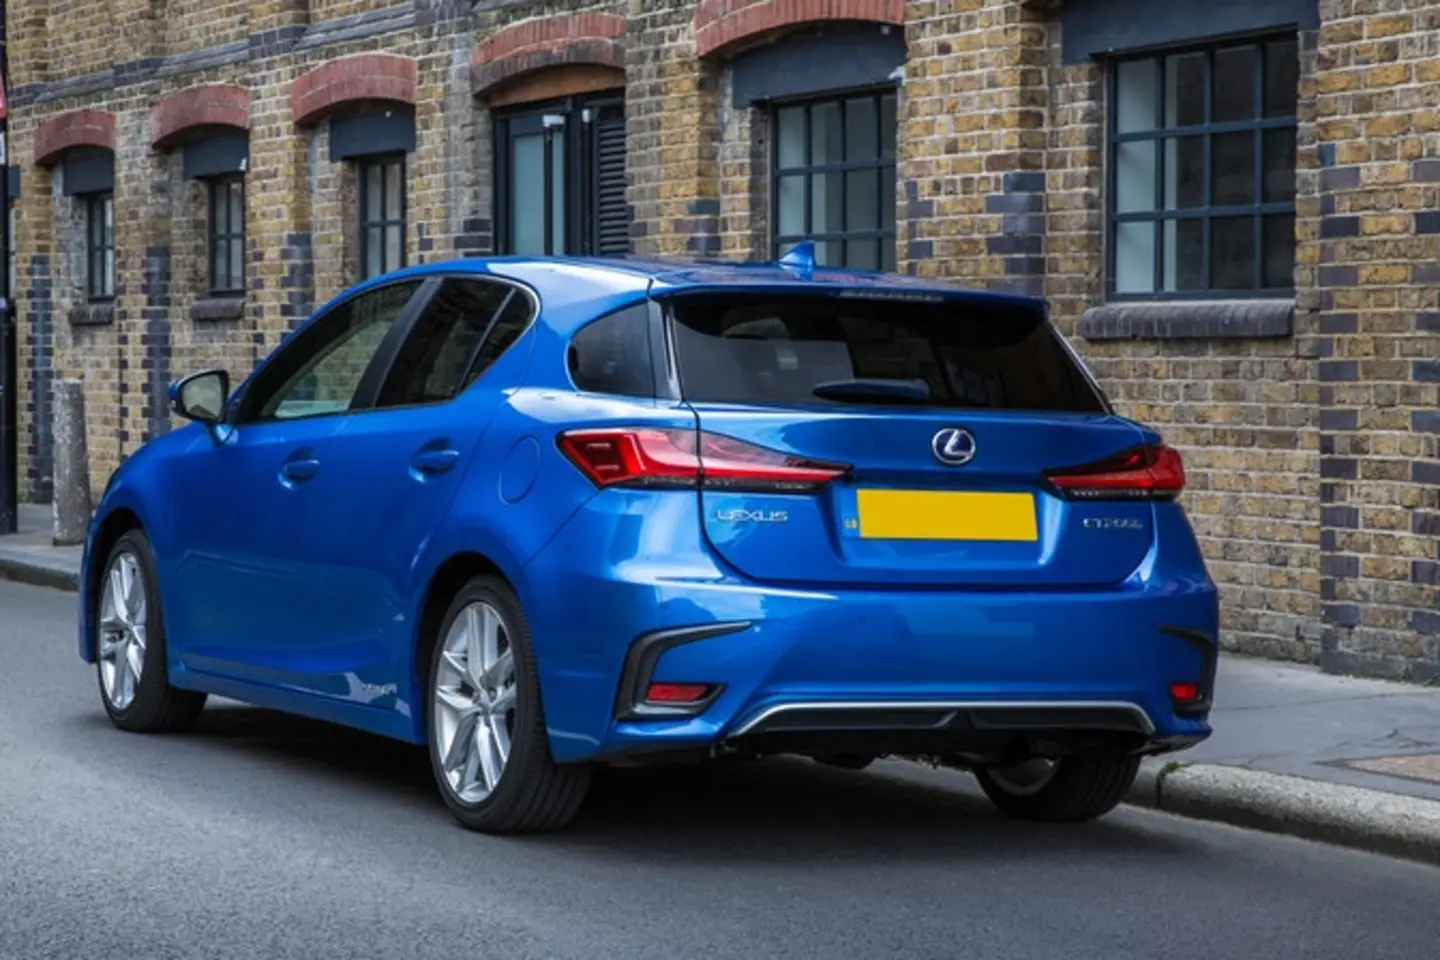 The rear exterior of a blue Lexus CT